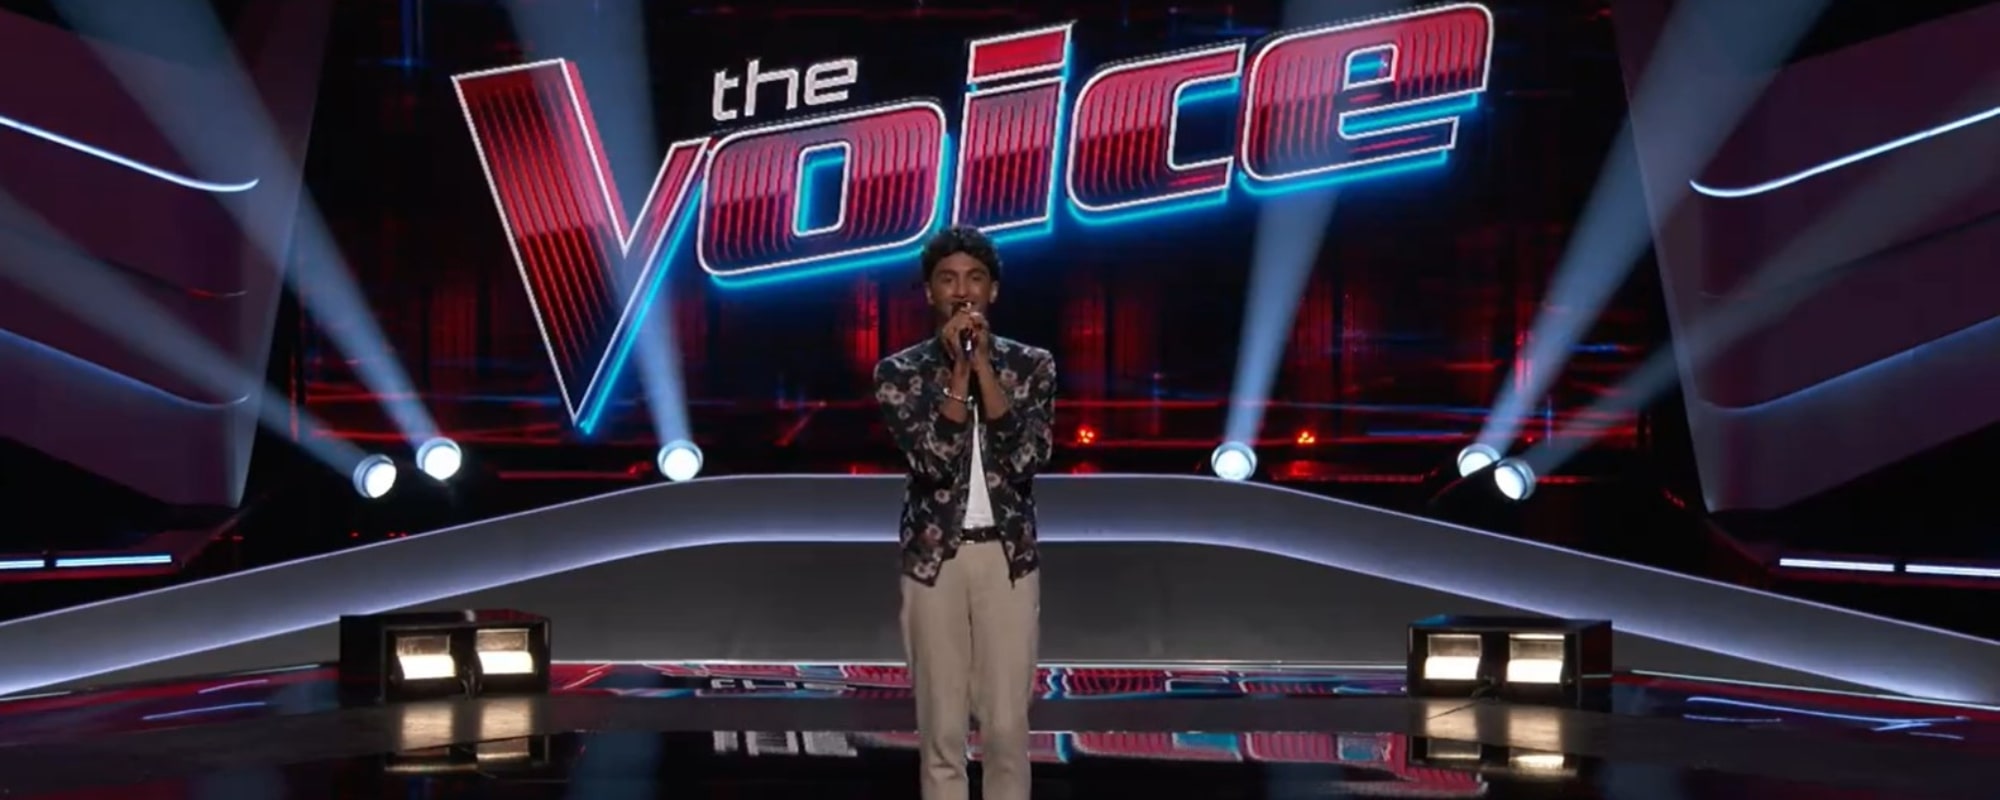 ‘The Voice’: 16-Year-Old William Alexander Honors His Late Grandfather With Moving Blind Audition Performance